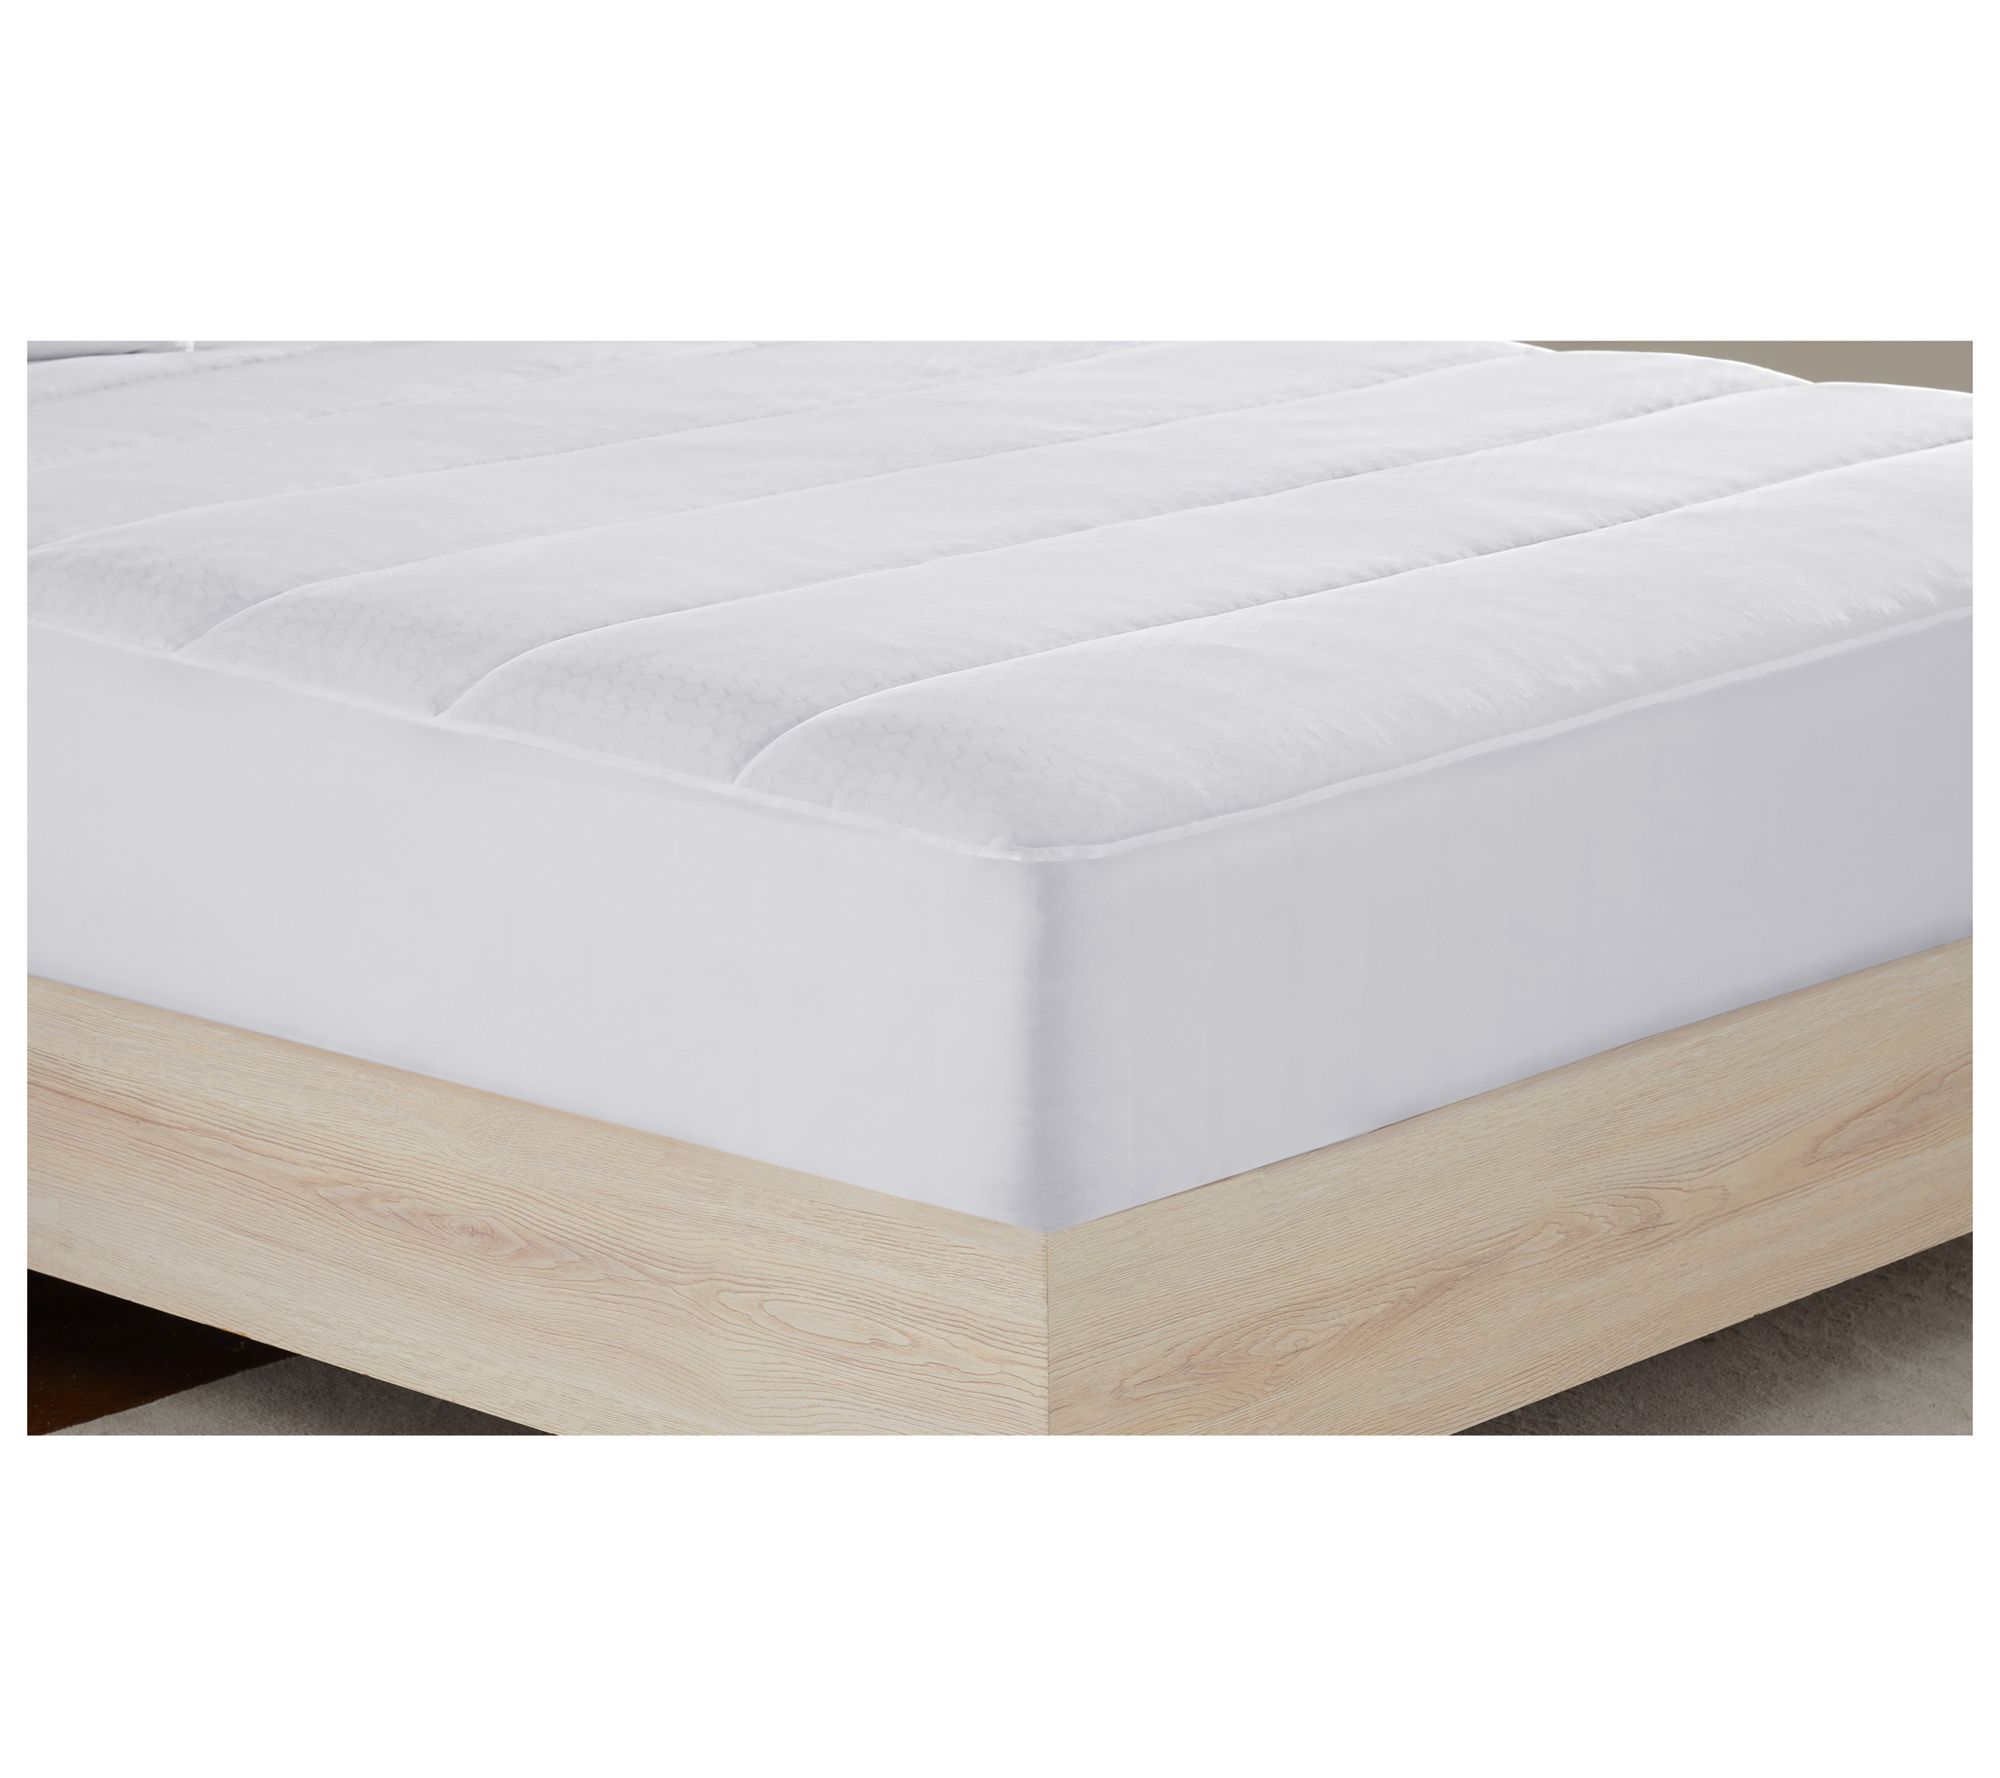 Sheex Performance Mattress Protector Top + 4Side Protection - Twin/Twin XL